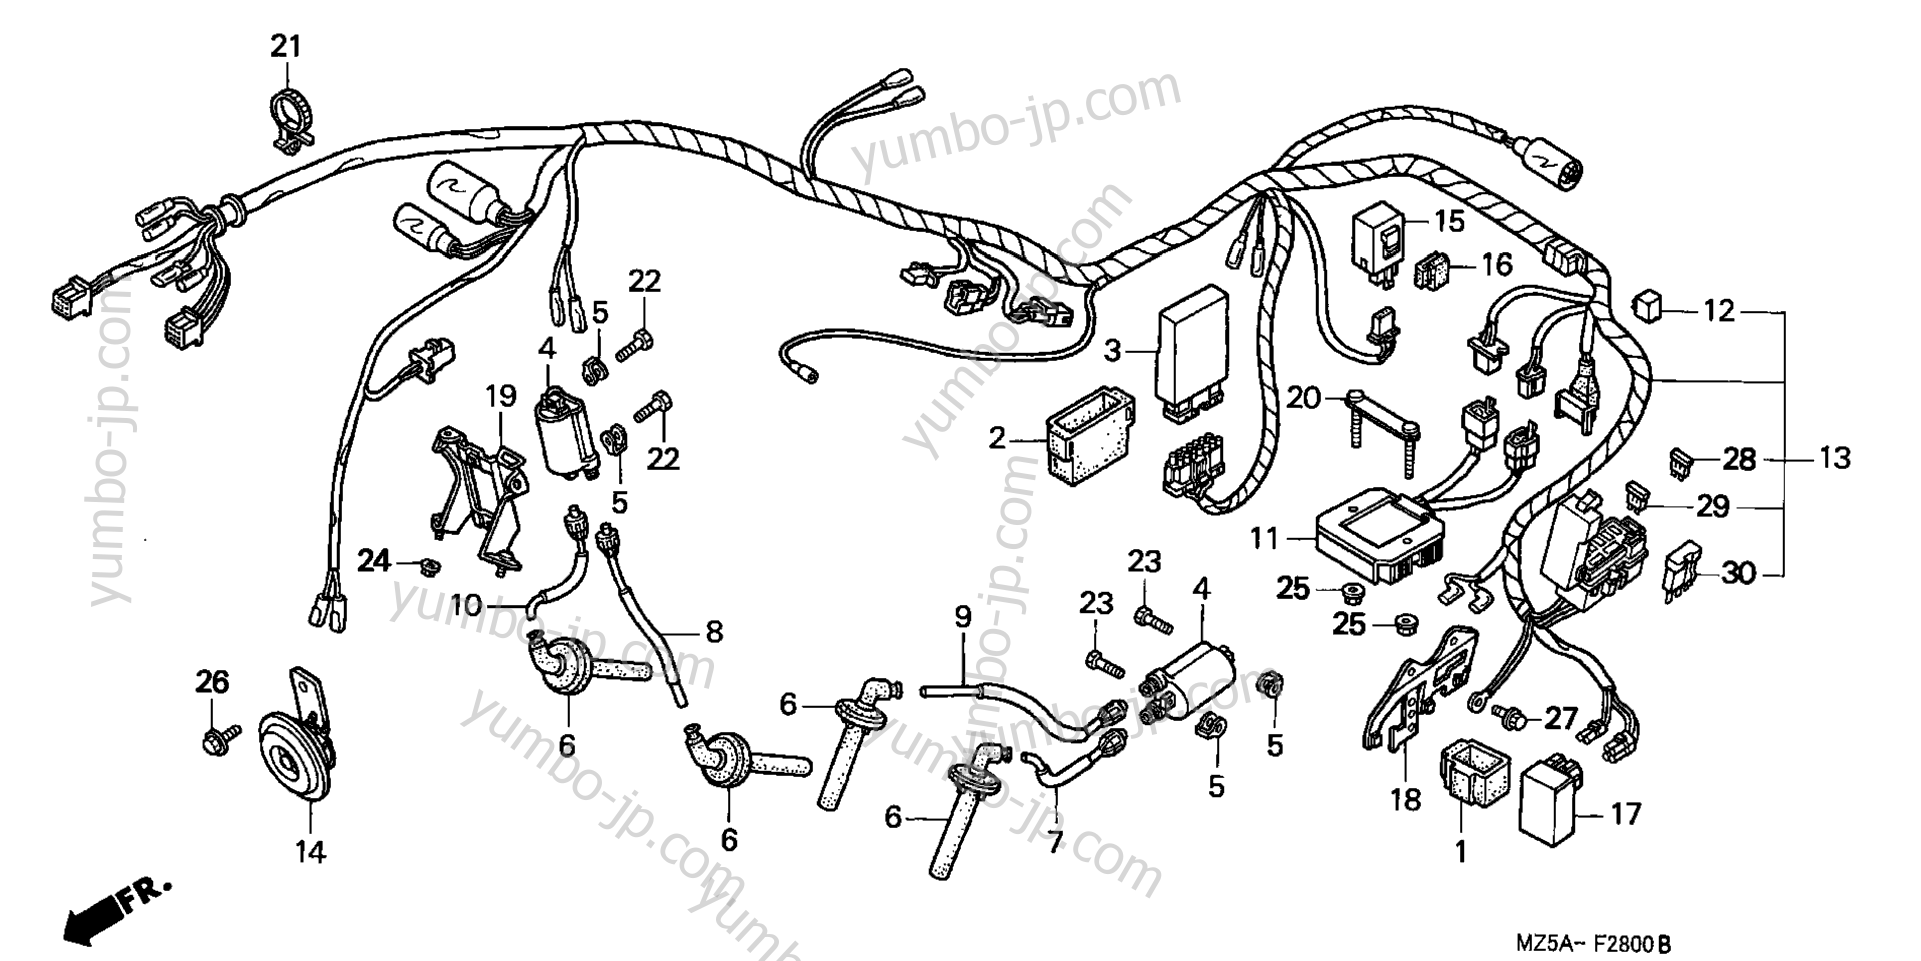 WIRE HARNESS for motorcycles HONDA VF750C AC 1999 year